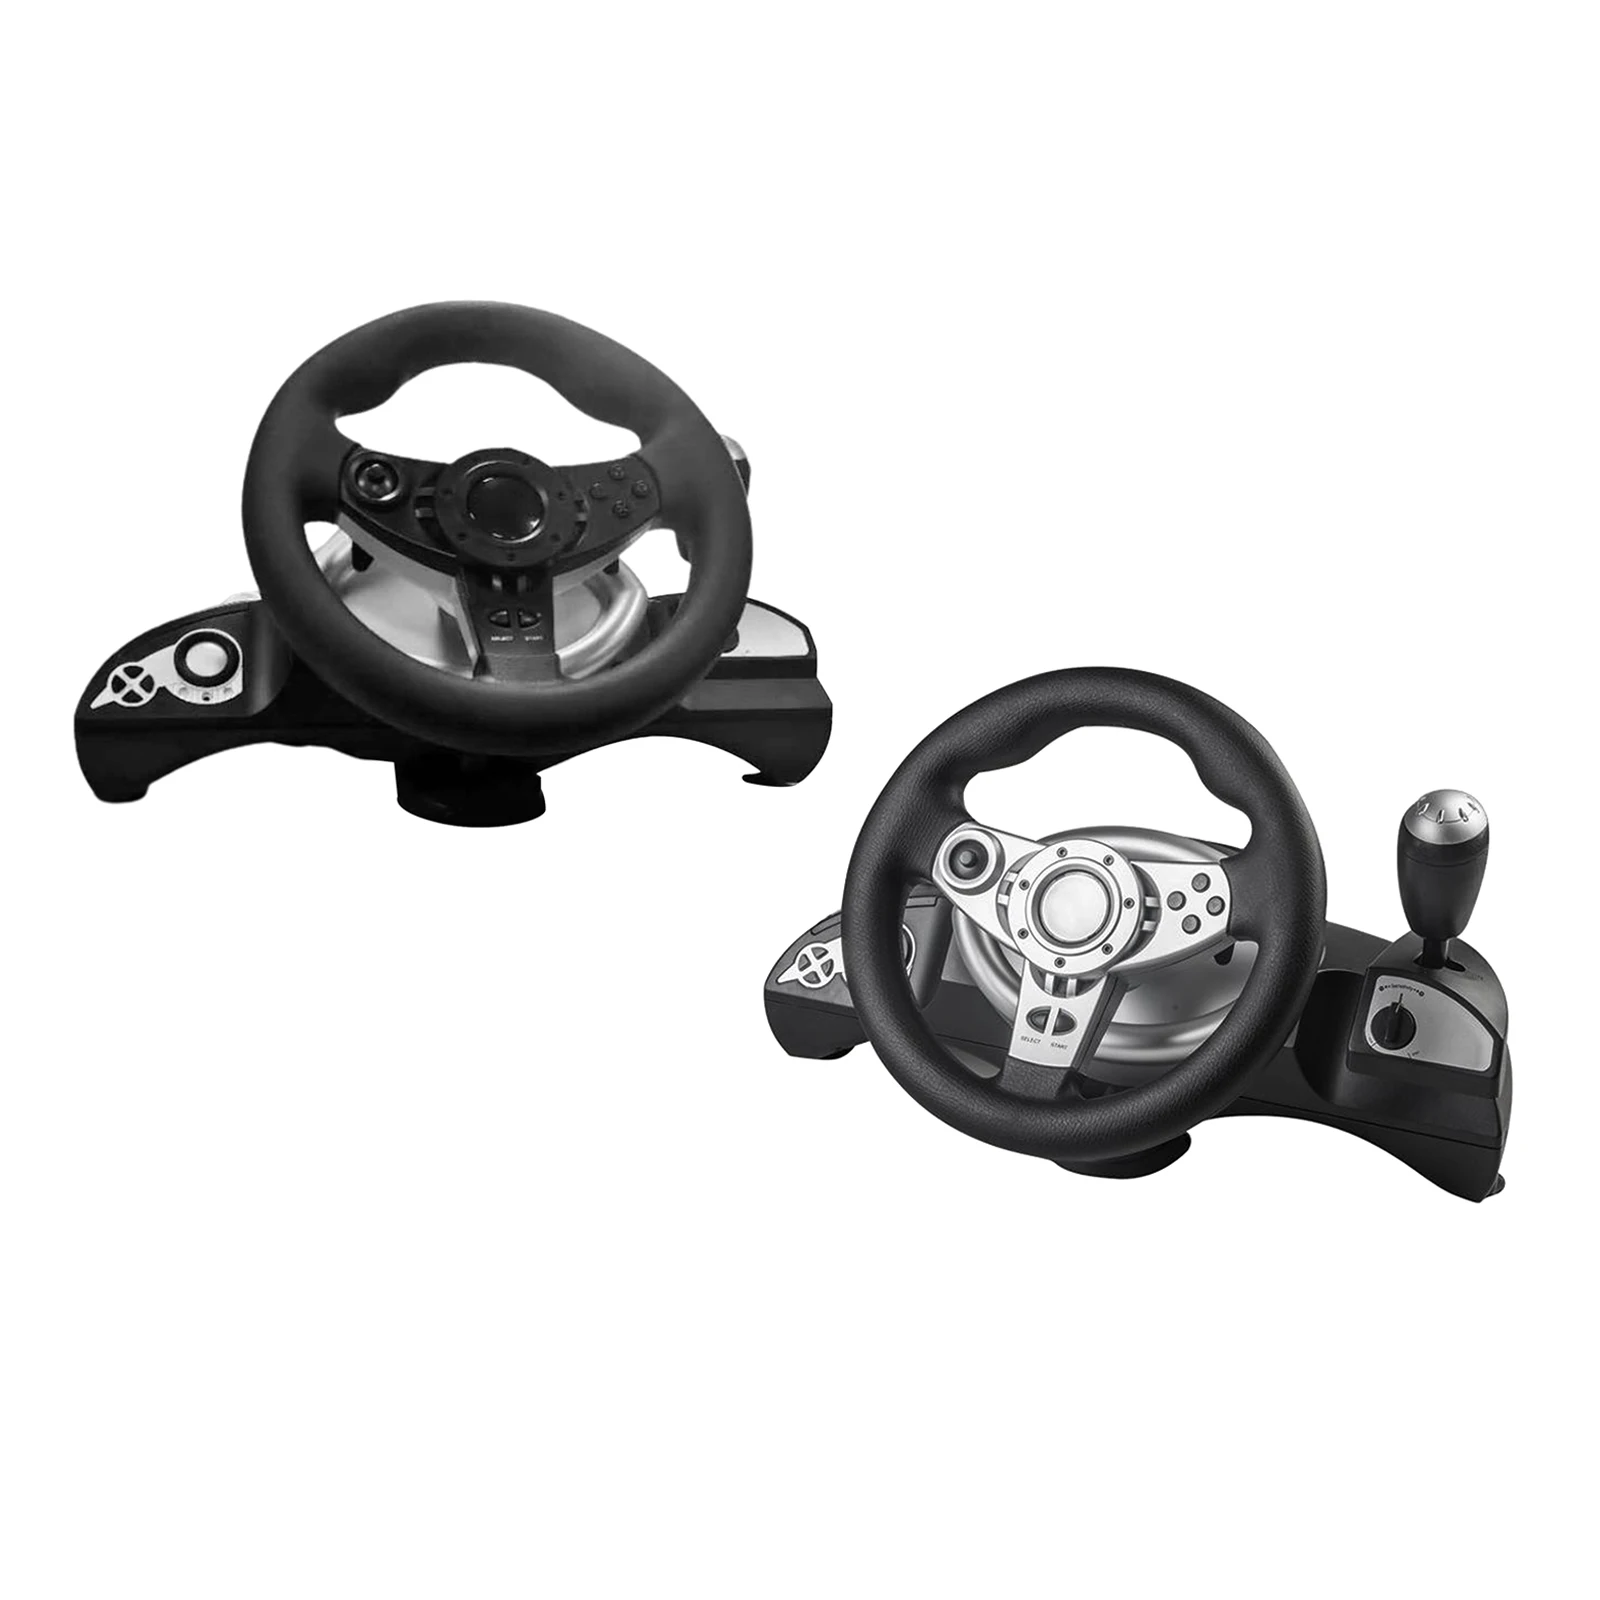 Vibration Car Racing Gaming Steering Wheel Pedal Kit Driving Simulator for PS3/PS2/PC - ANKUX Tech Co., Ltd